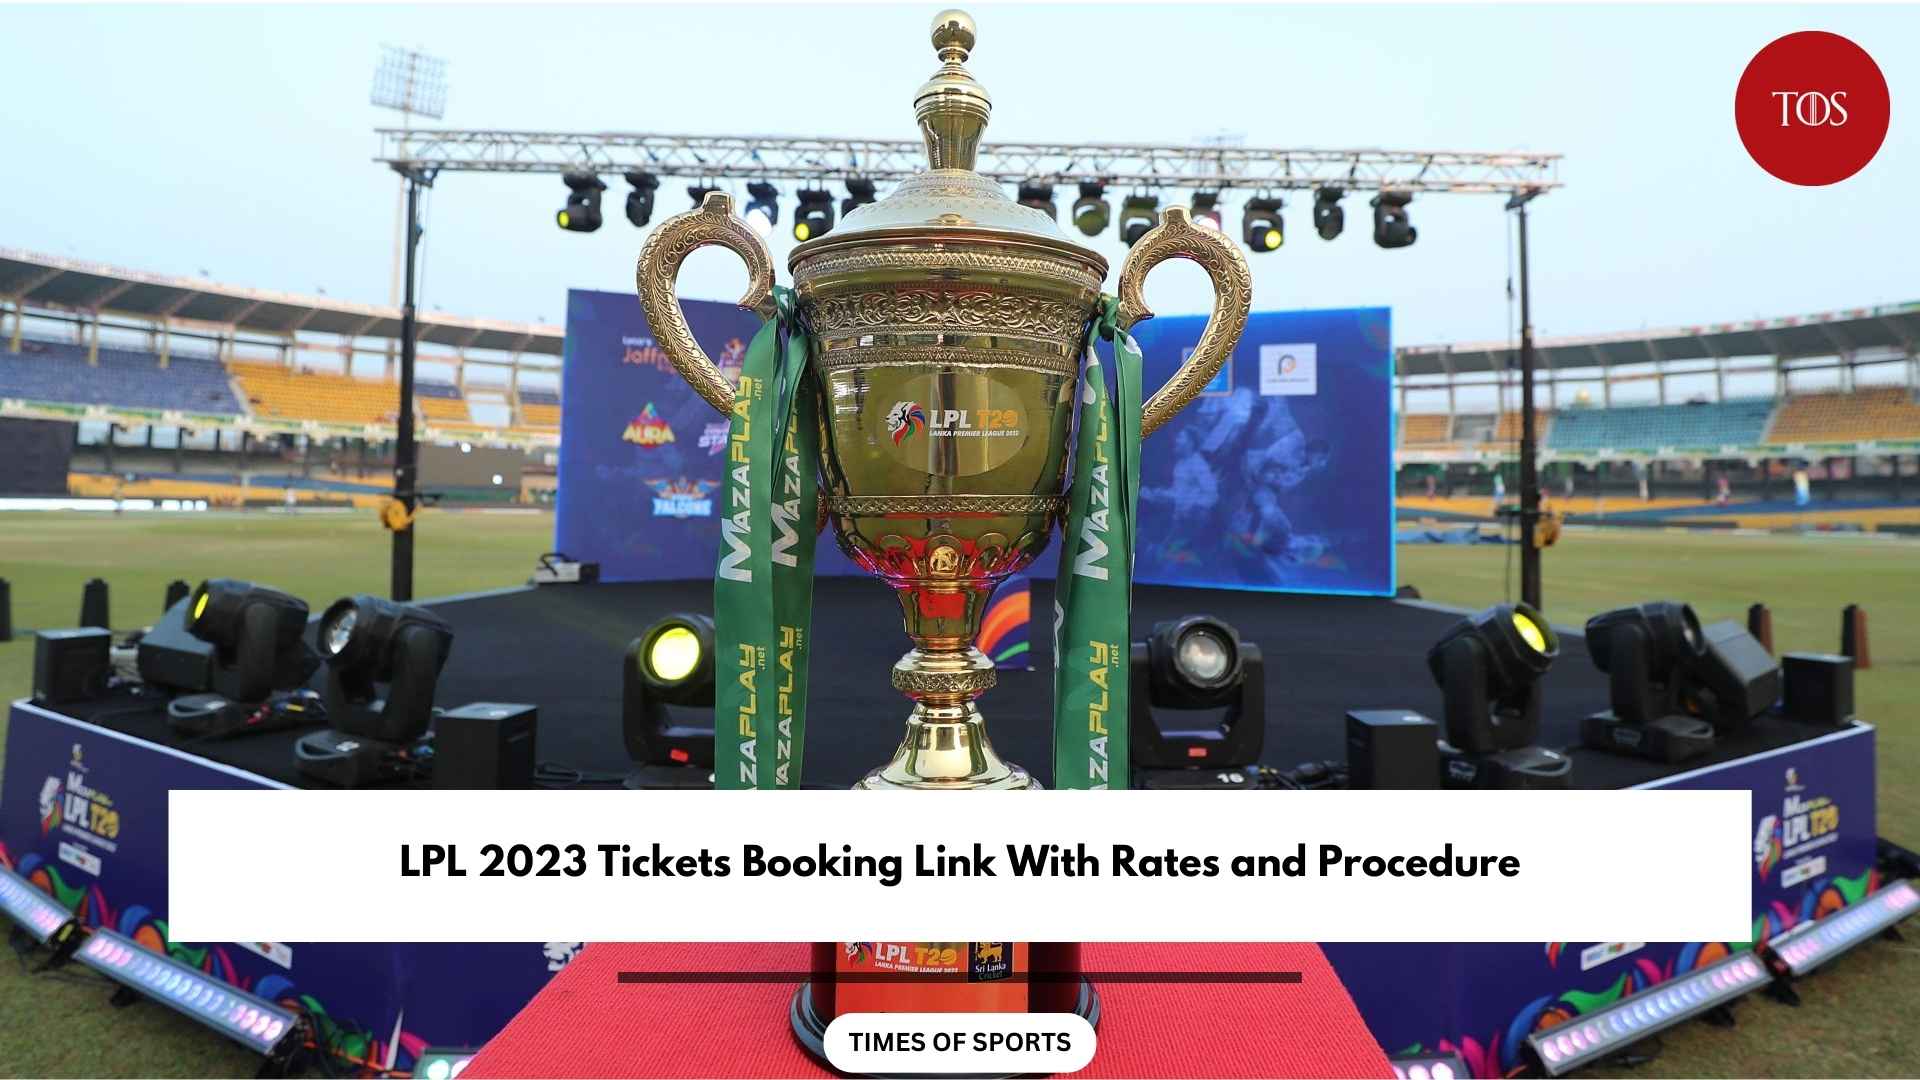 LPL 2023 Tickets Booking Link With Rates and Procedure